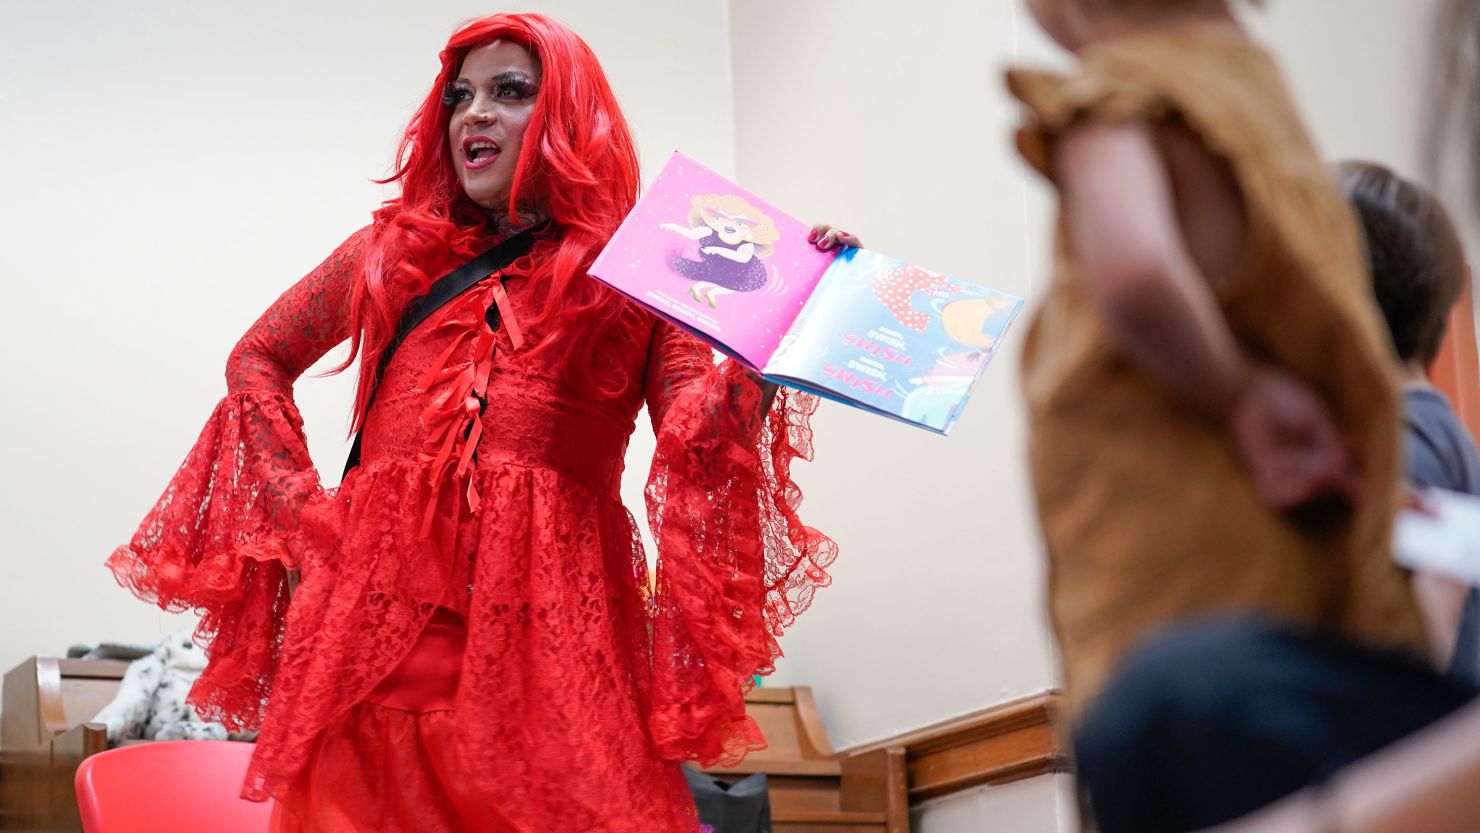 The drag queen Flame reads stories to children during Drag Queen Story Hour at a public library in New York on June 17, 2022.